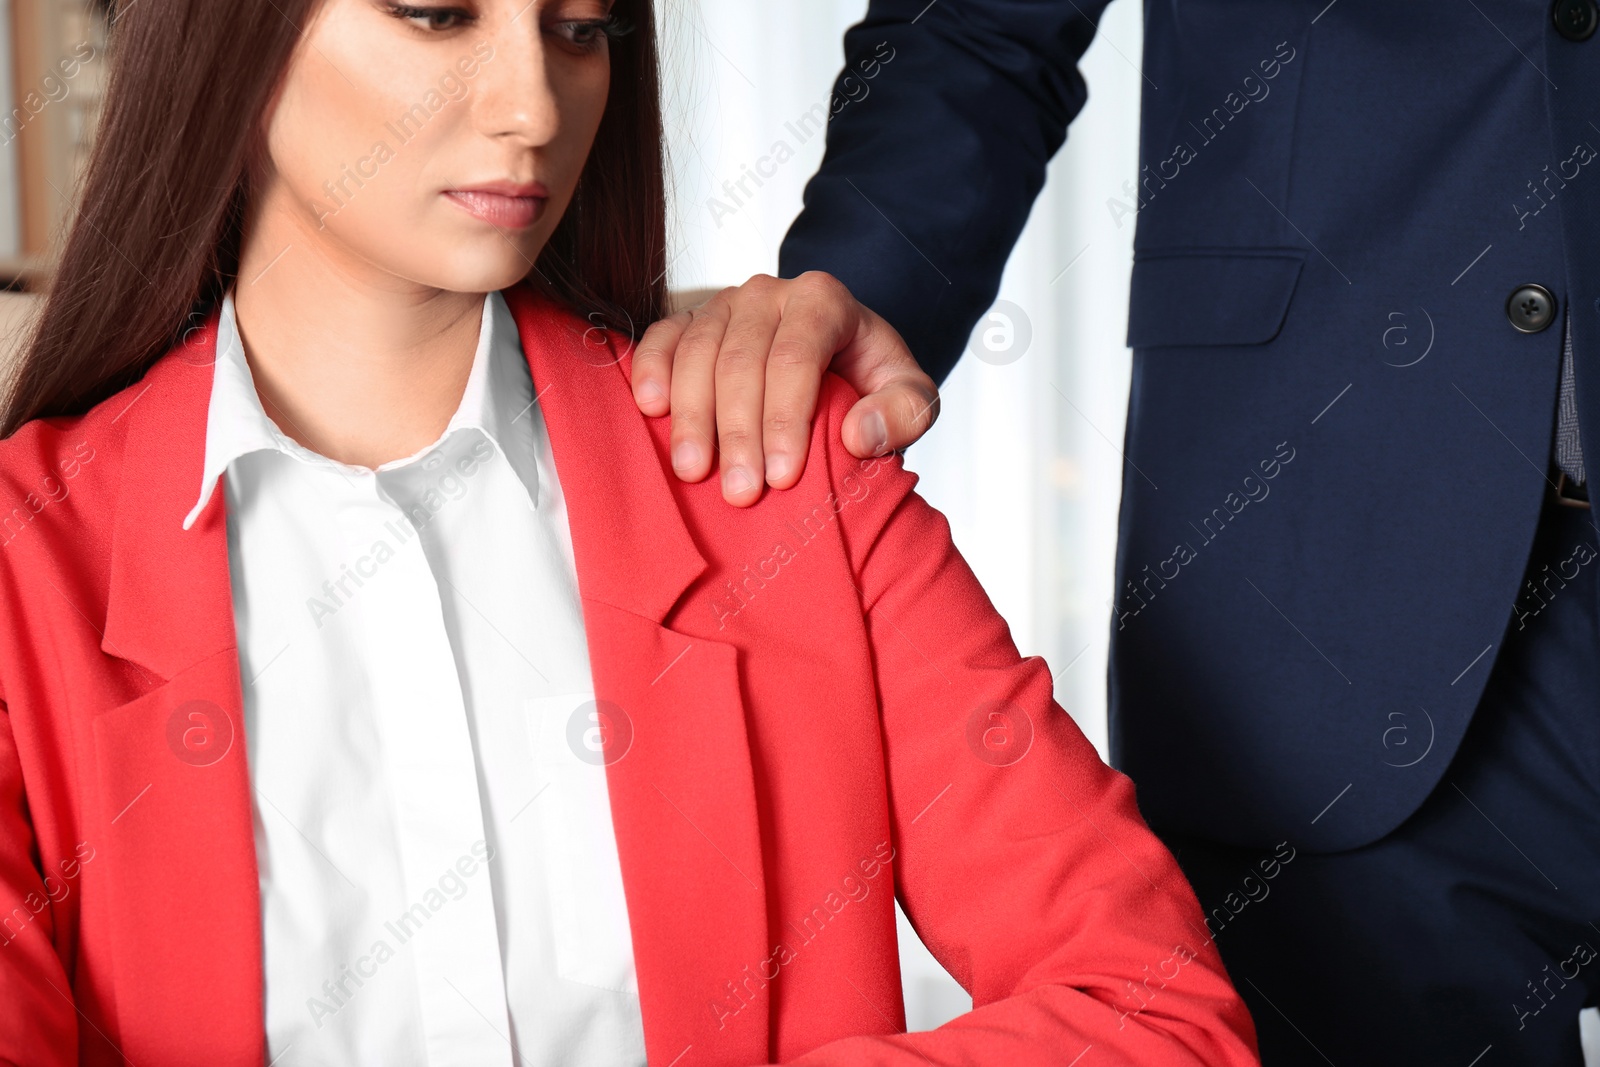 Photo of Boss molesting his female secretary in office, closeup. Sexual harassment at work